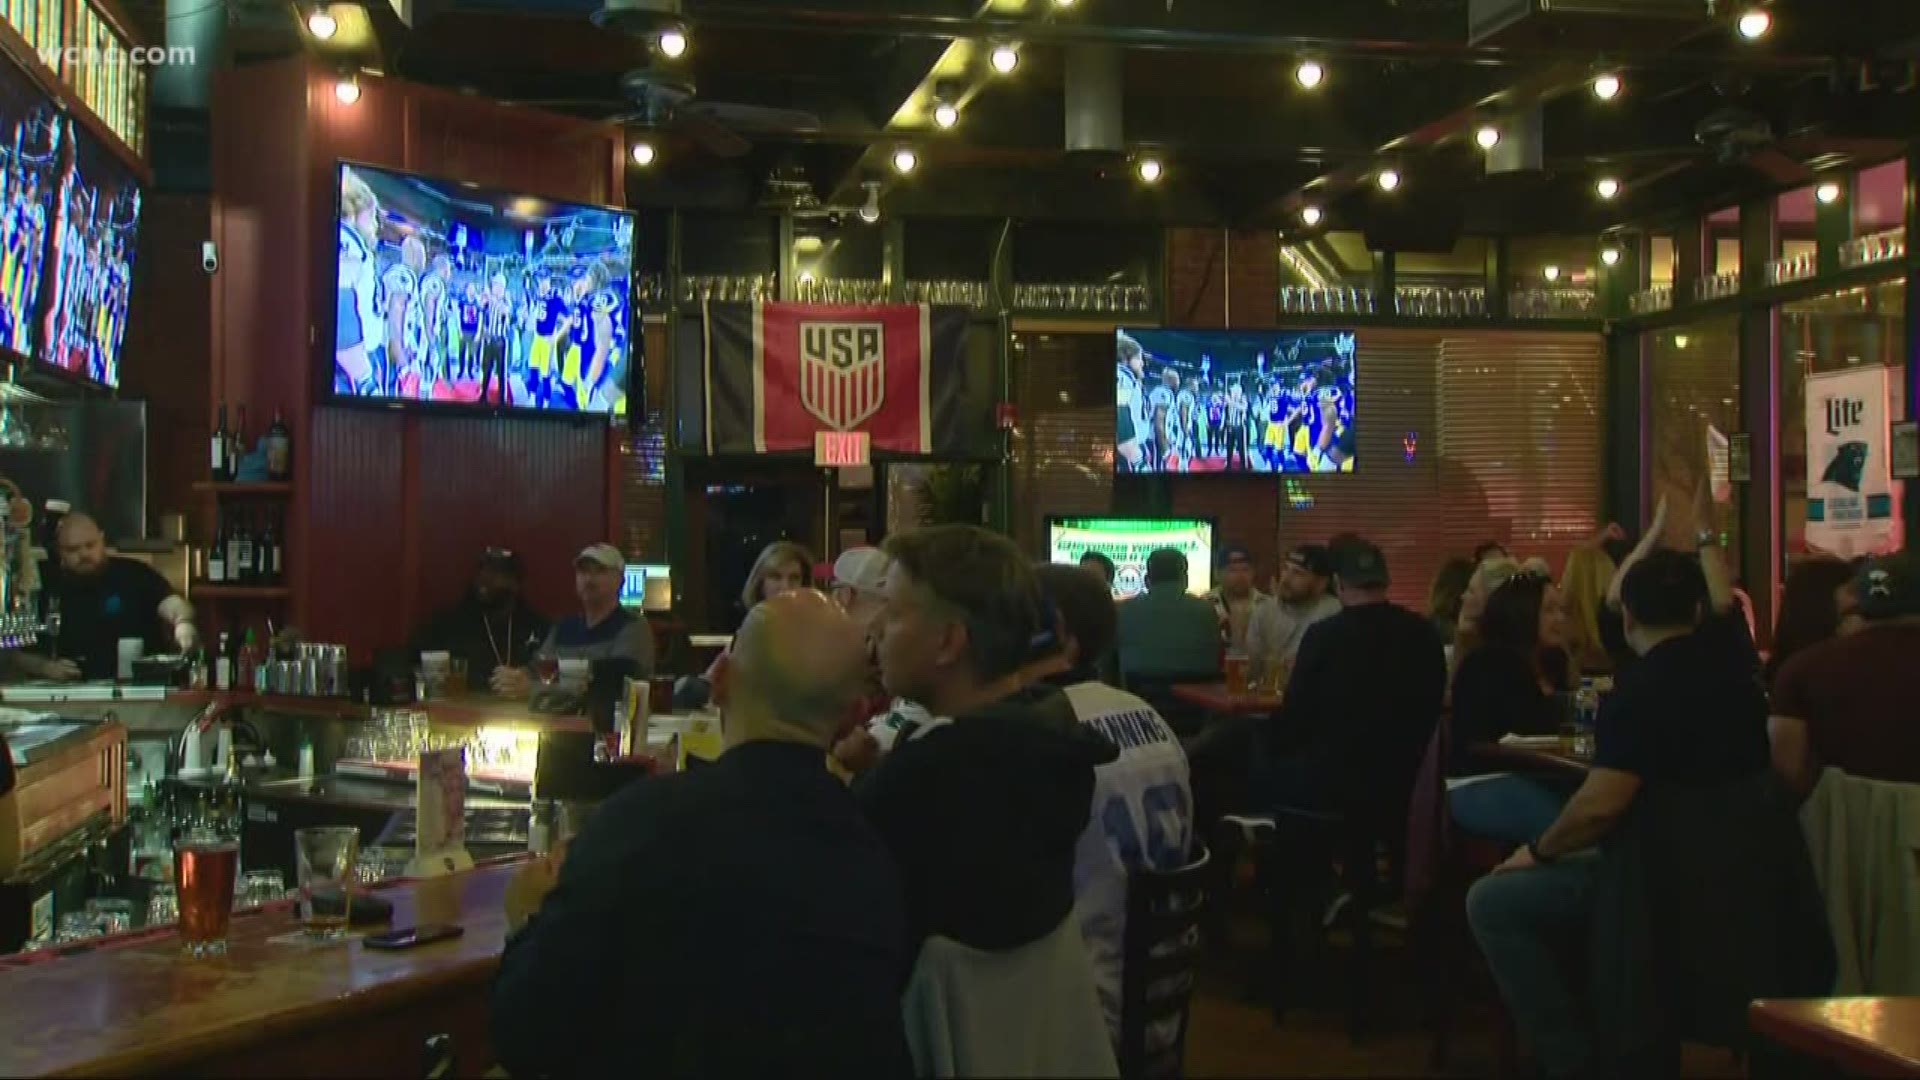 Football fans across the Queen City crowded into bars and restaurants to watch the big game -- even though the Panthers didn't make the cut this year.